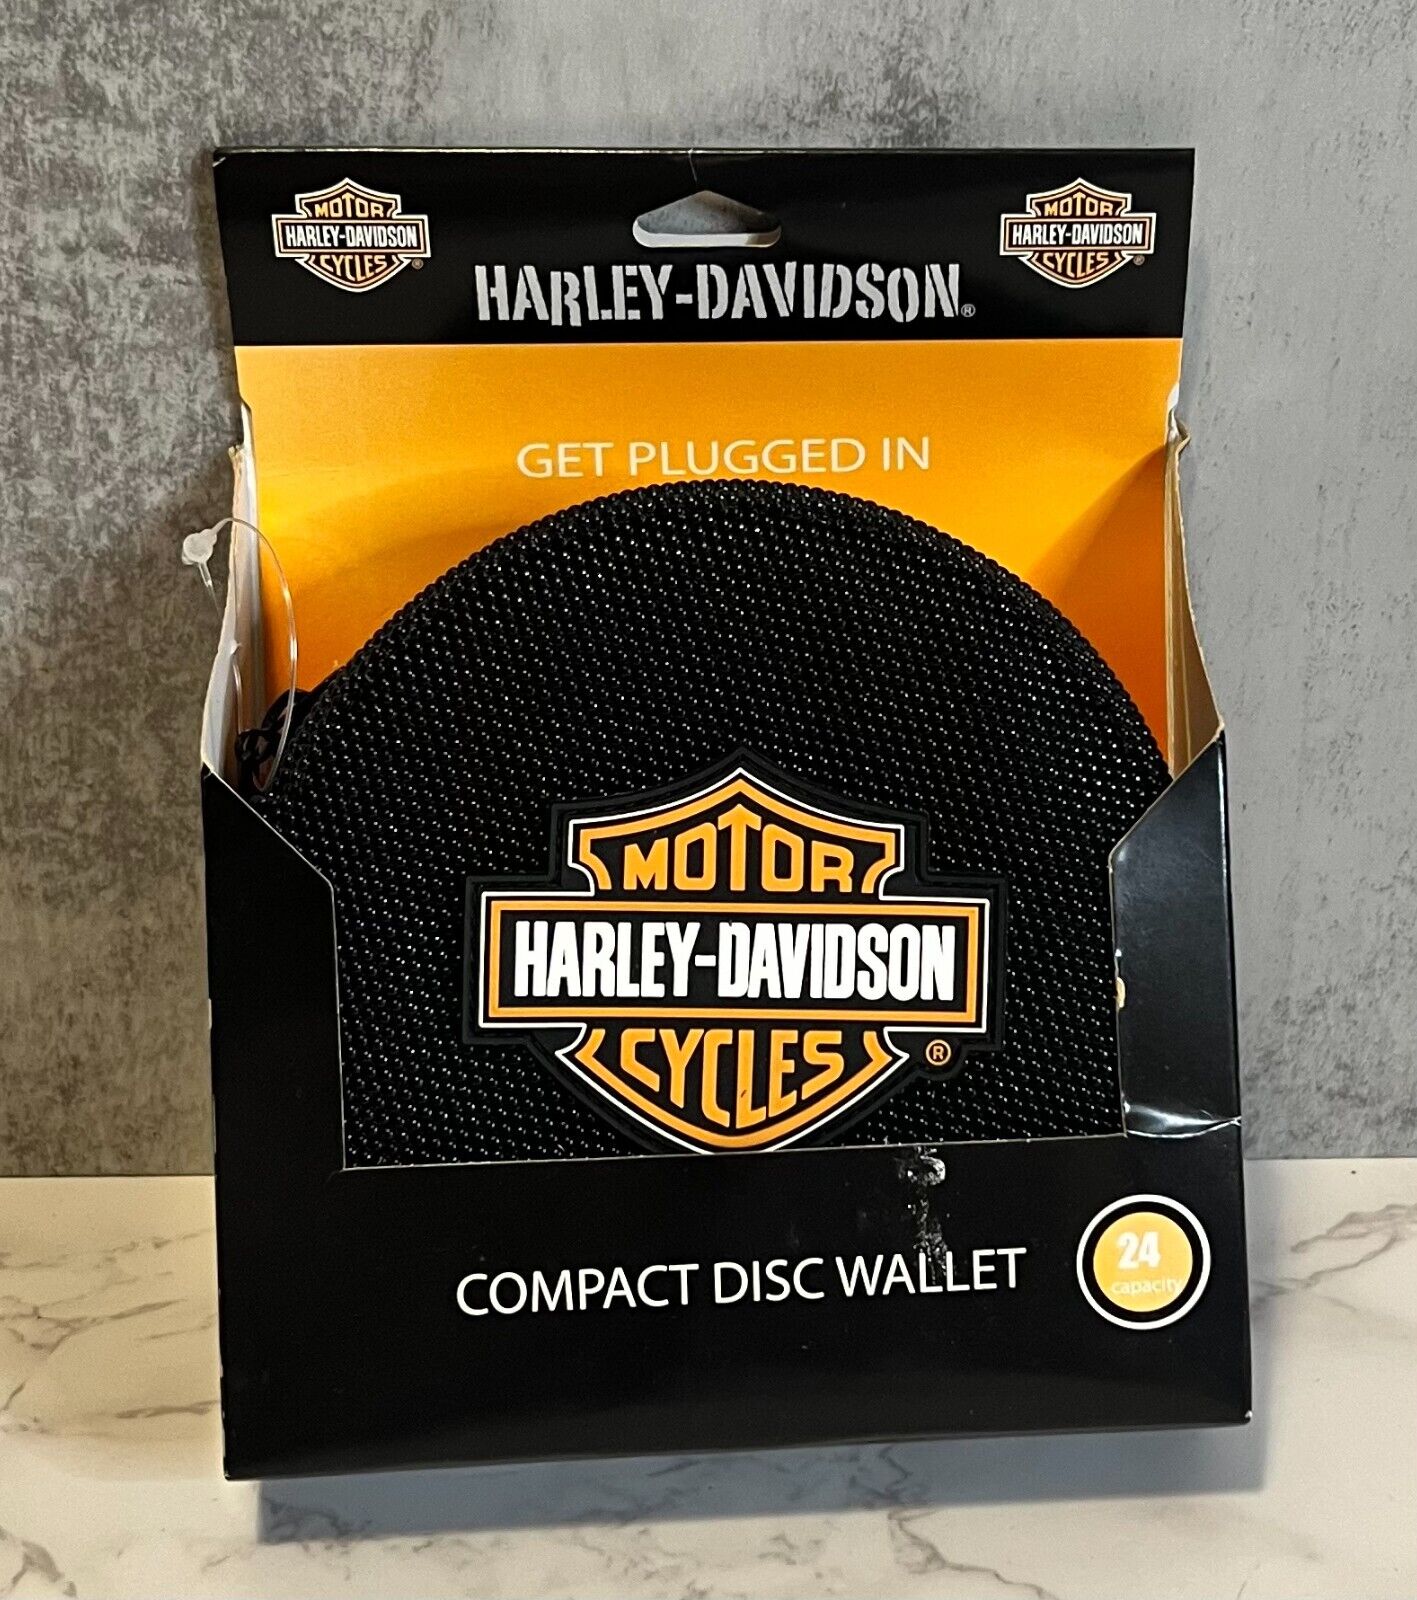 Harley Davidson Compact Disc Wallet 24 CD Music Case Haddad Accessories